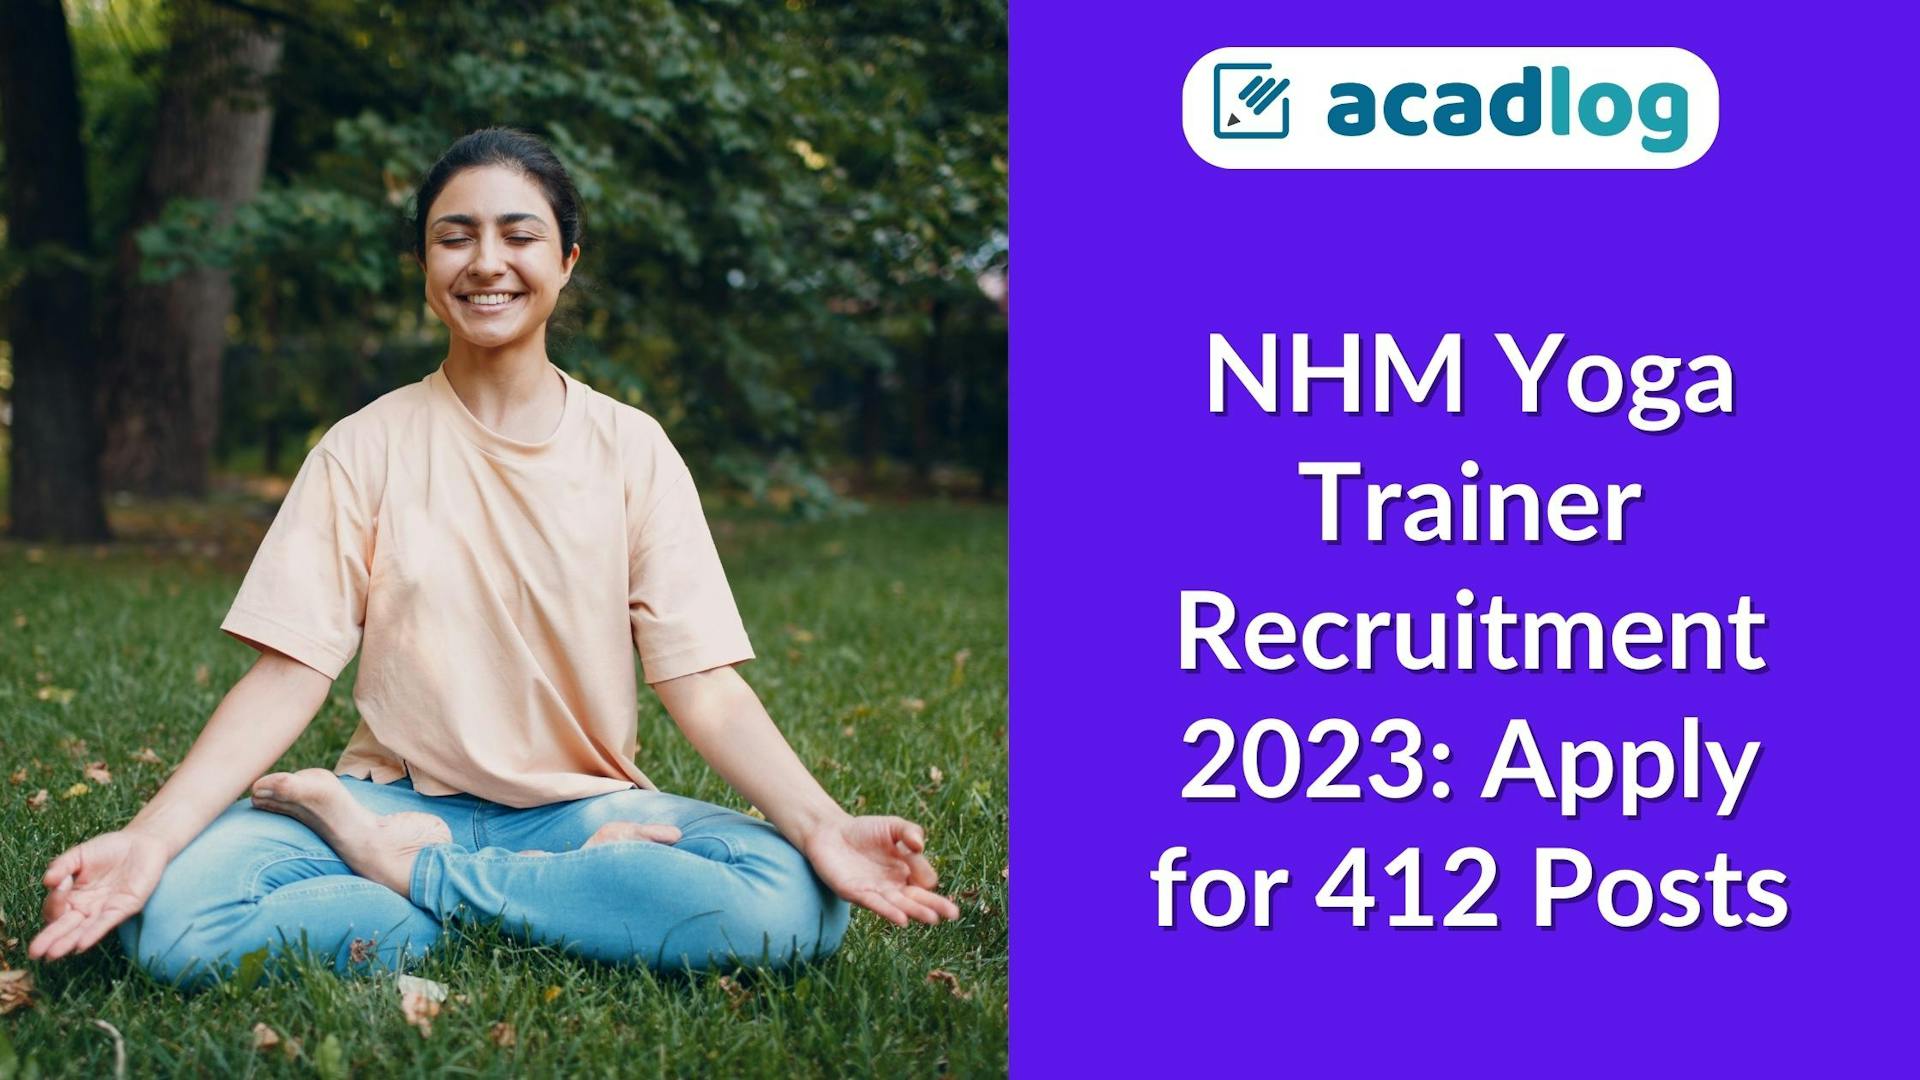 NHM Yoga Trainer Jobs 2023: Apply for 412 Posts